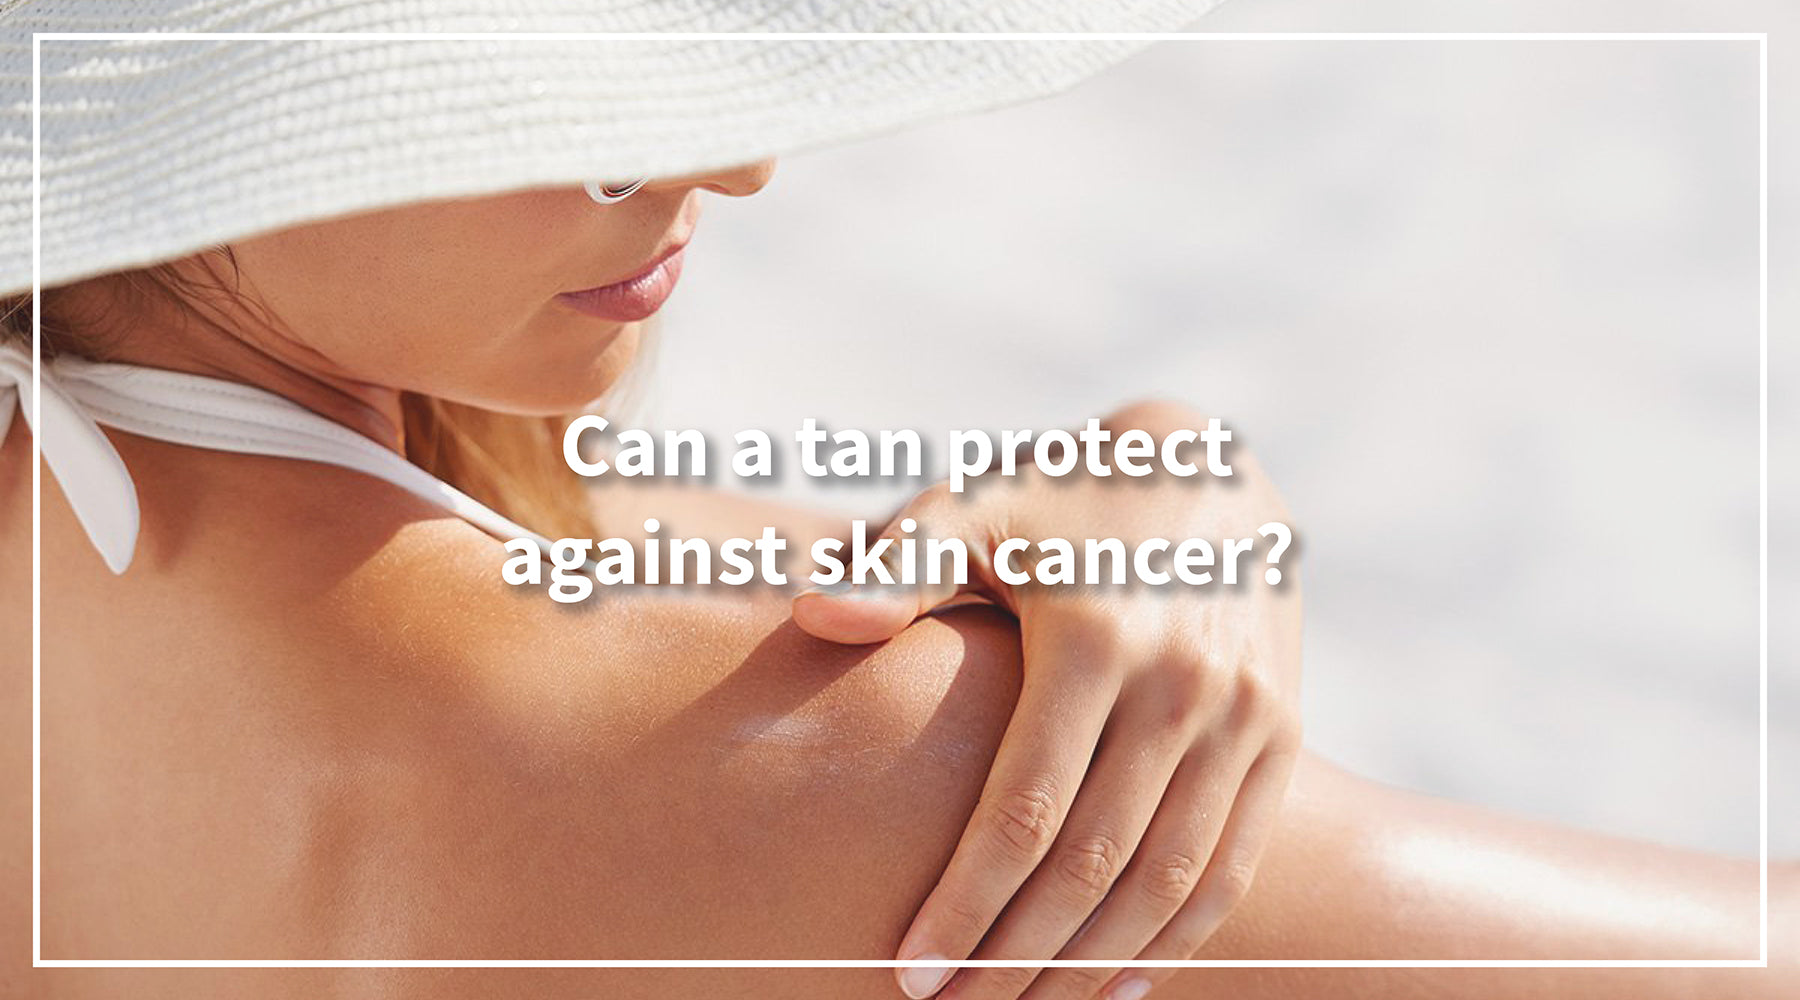 Can a tan protect against skin cancer?